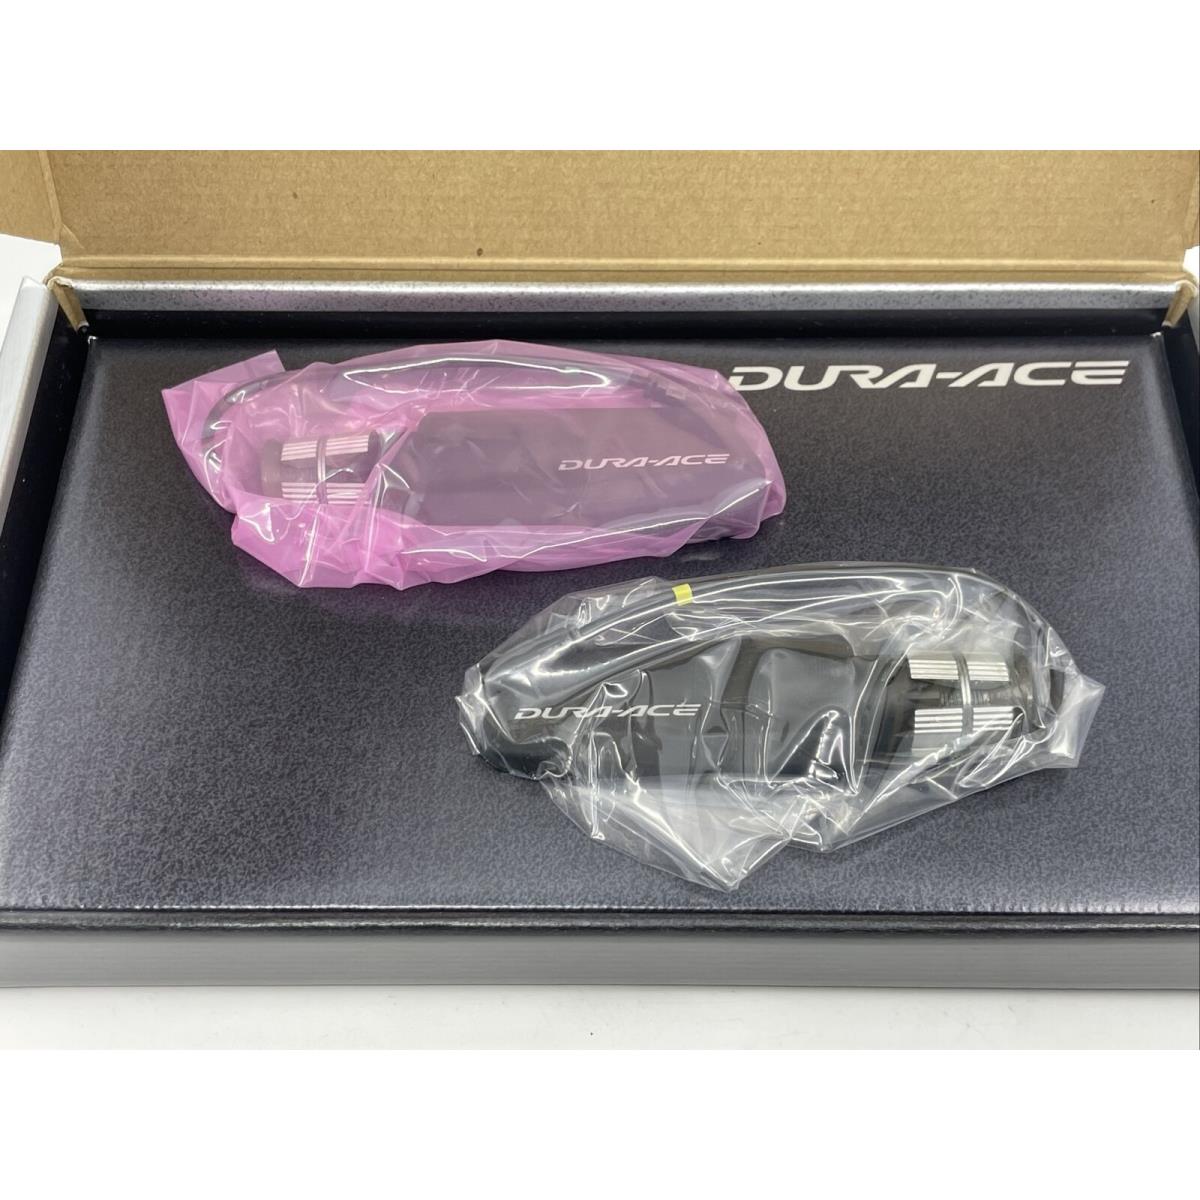 Nos Shimano Dura-ace SW-7971 First Generation Di2 TT Tri Shifters 2x10-Speed